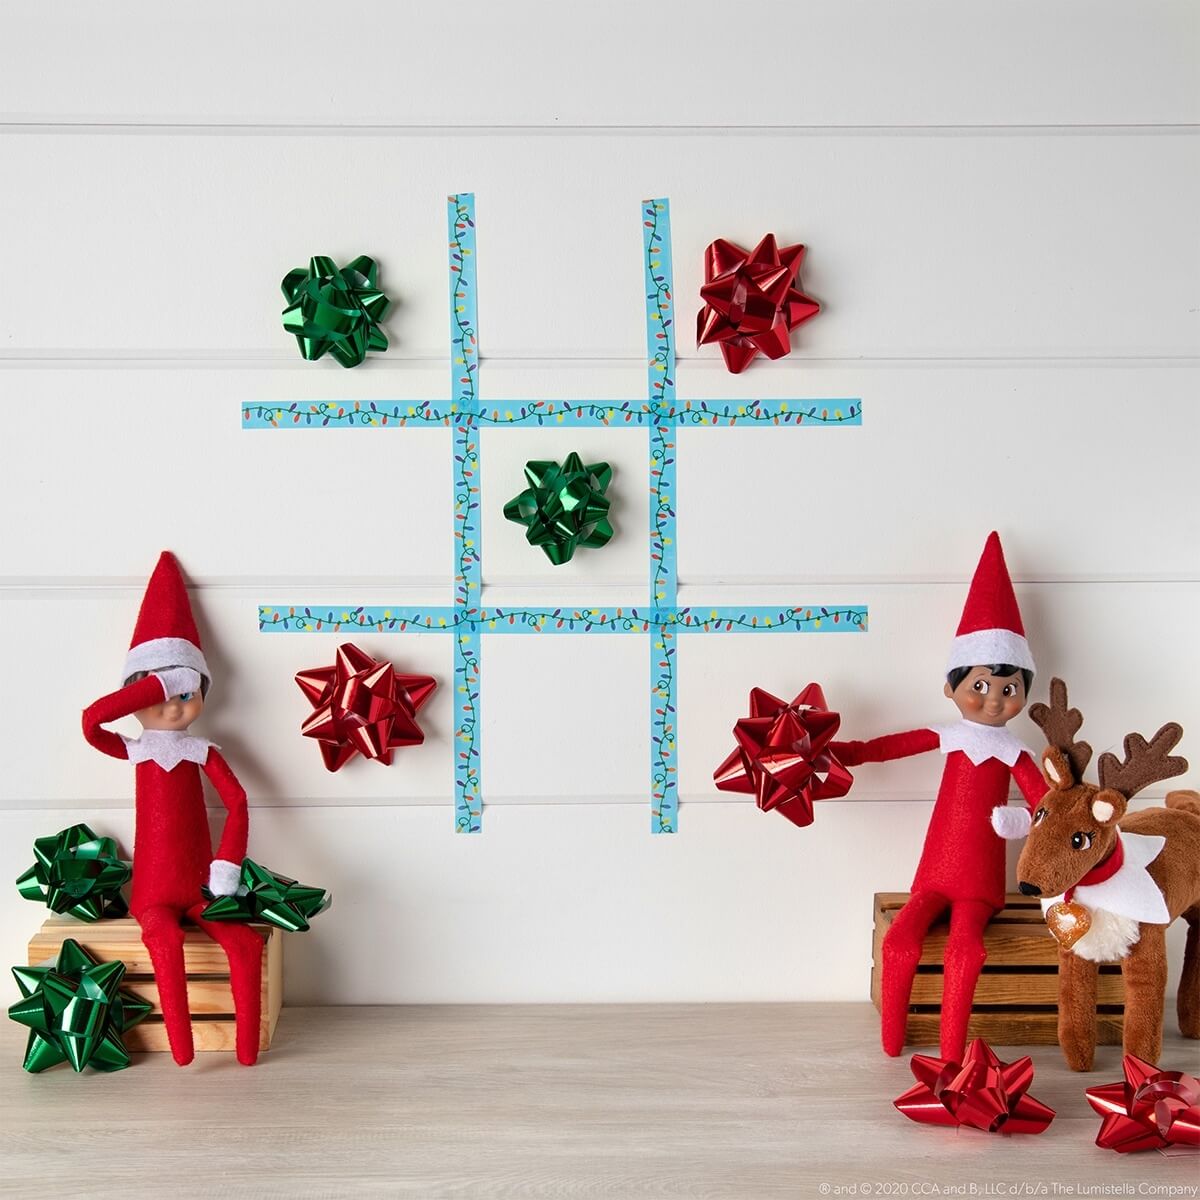 Elf on the shelf playing noughts and crosses